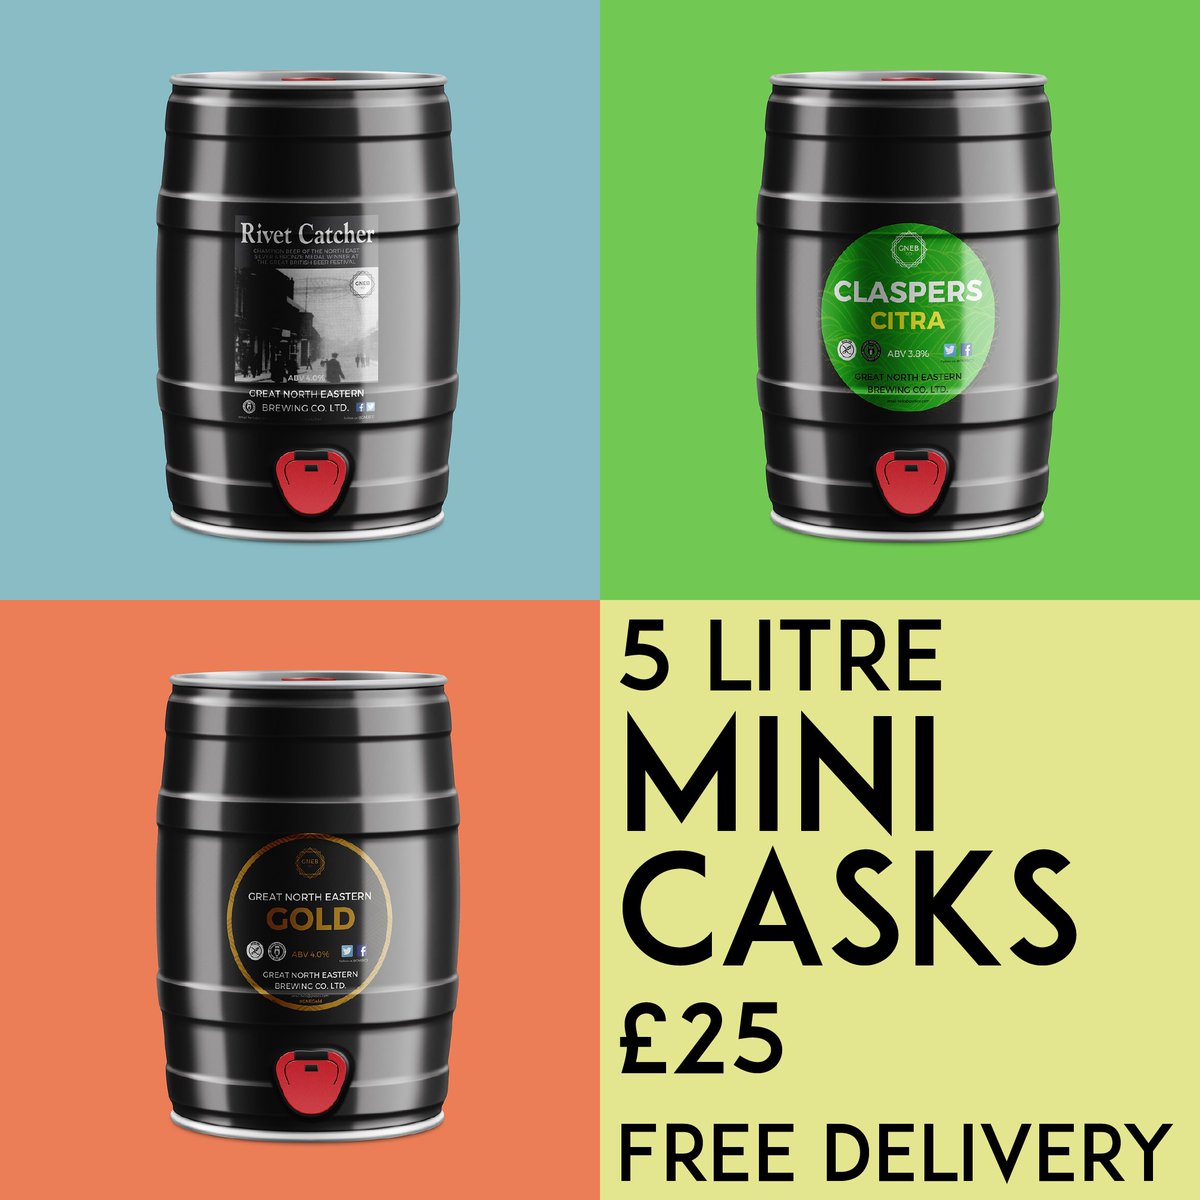 Mini Casks are back! We have 3 classic GNEBCO cask beers for you to choose from for a limited time only over the festive season! Rivet Catcher (ABV 4.0%) Great North Eastern Gold (ABV 4.0) Claspers Citra (3.8%) FREE DELIVERY to NE DL DH TS SR Postcodes